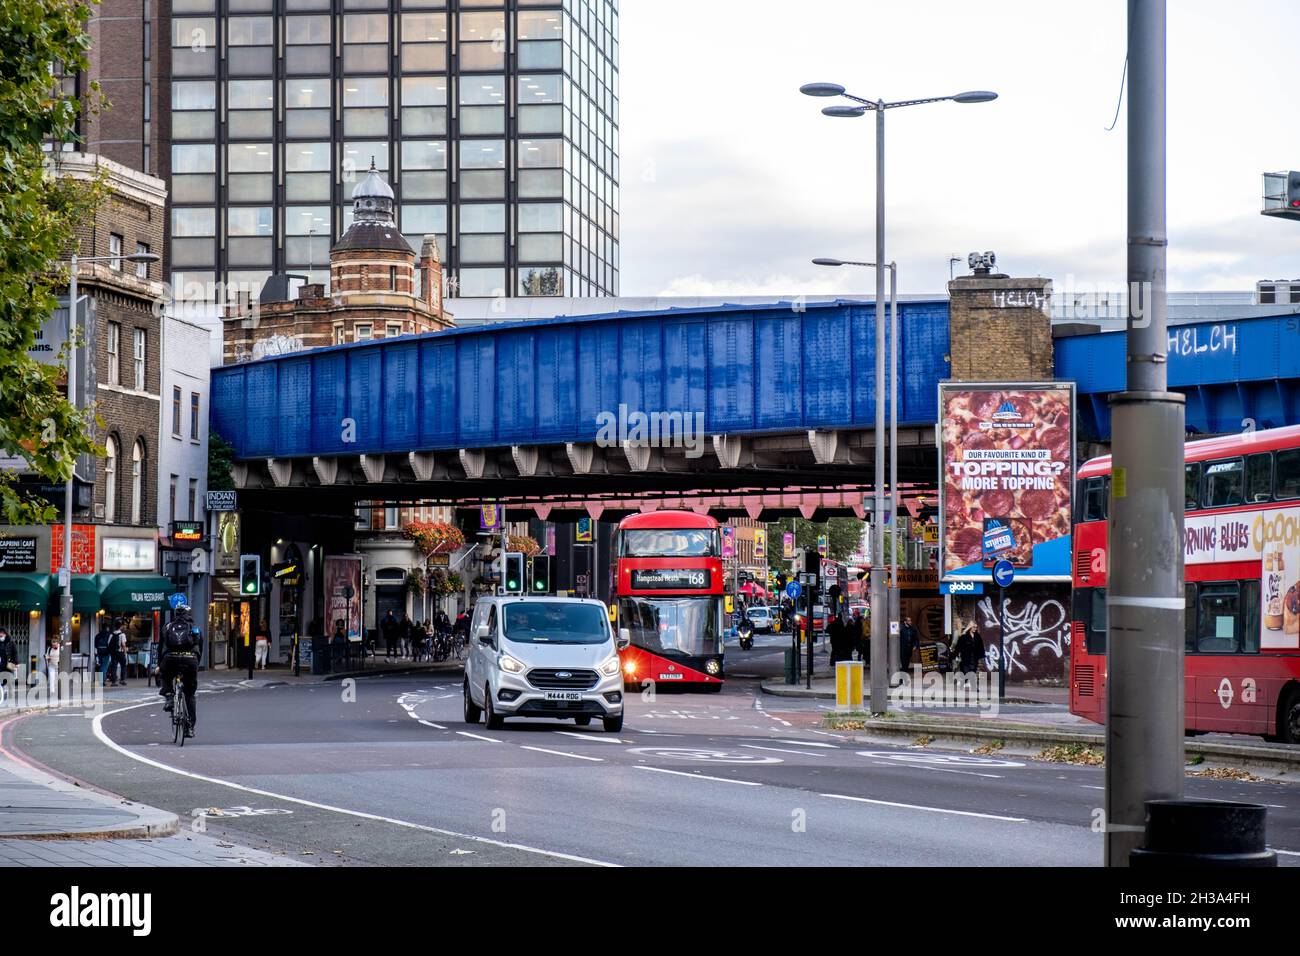 Blue Painted Railway Bridge Crossing A Busy London Street In Waterloo Central London With Traffic And Public Transport Busses And A Single Cyclist Stock Photo